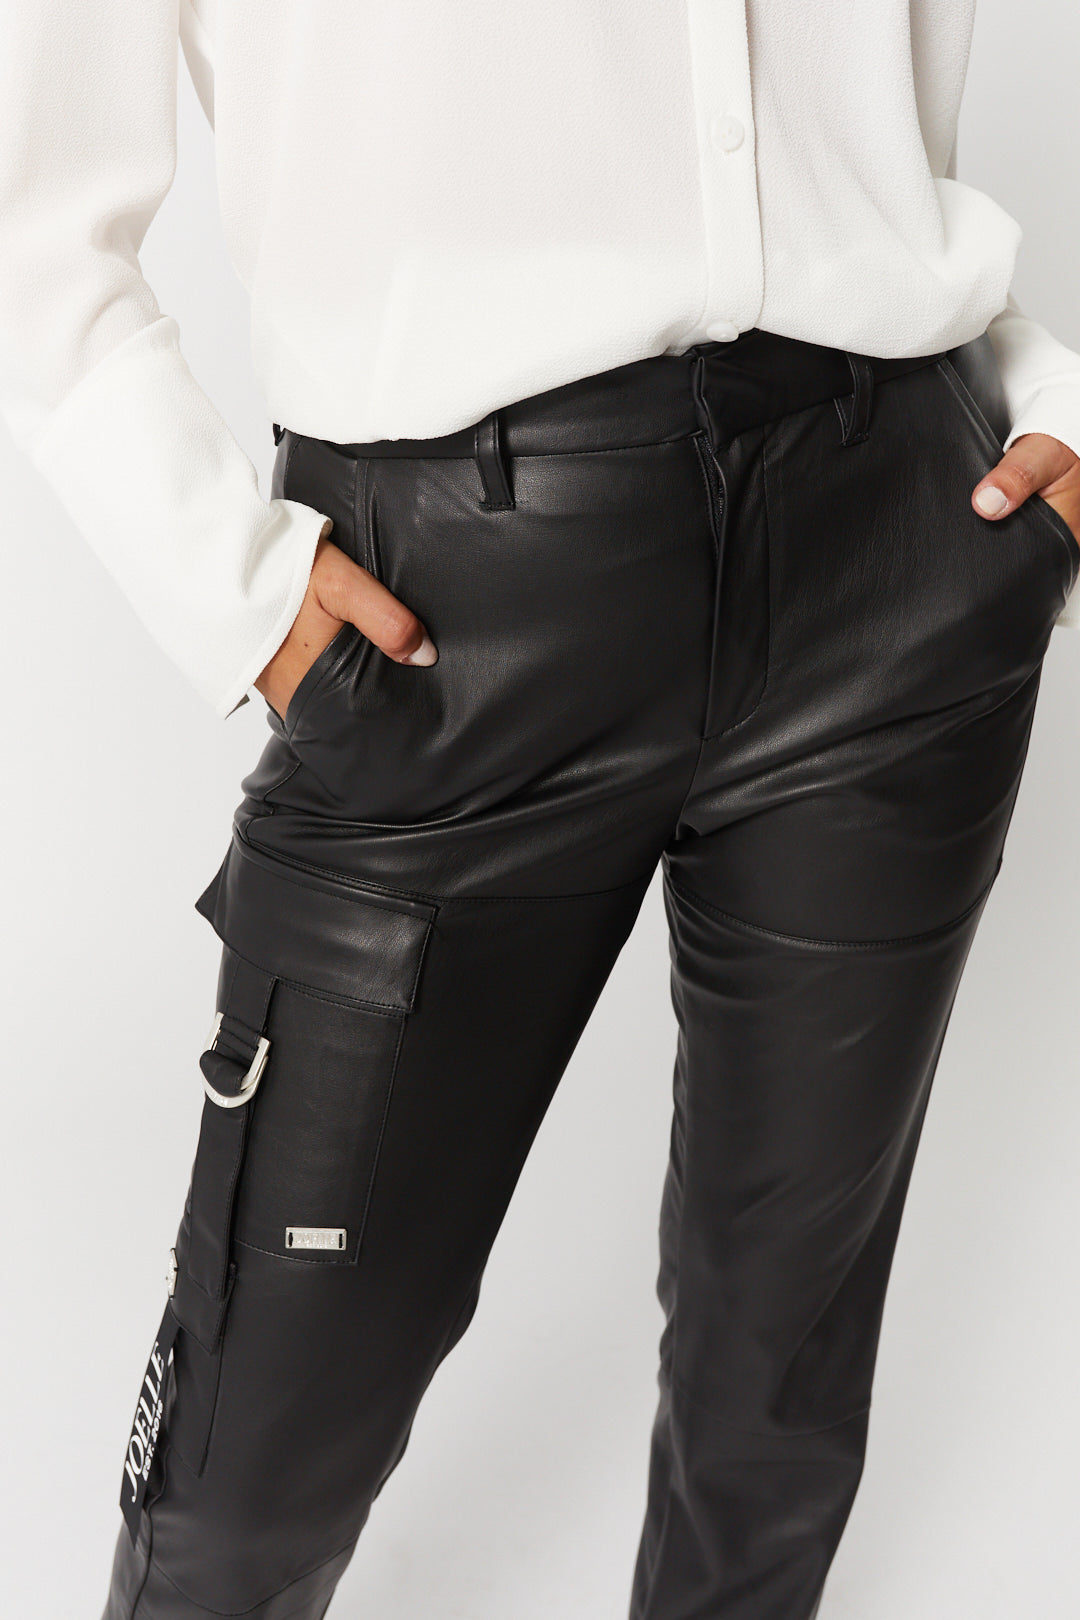 Black leather-effect pants with asymmetrical pockets | Daphne